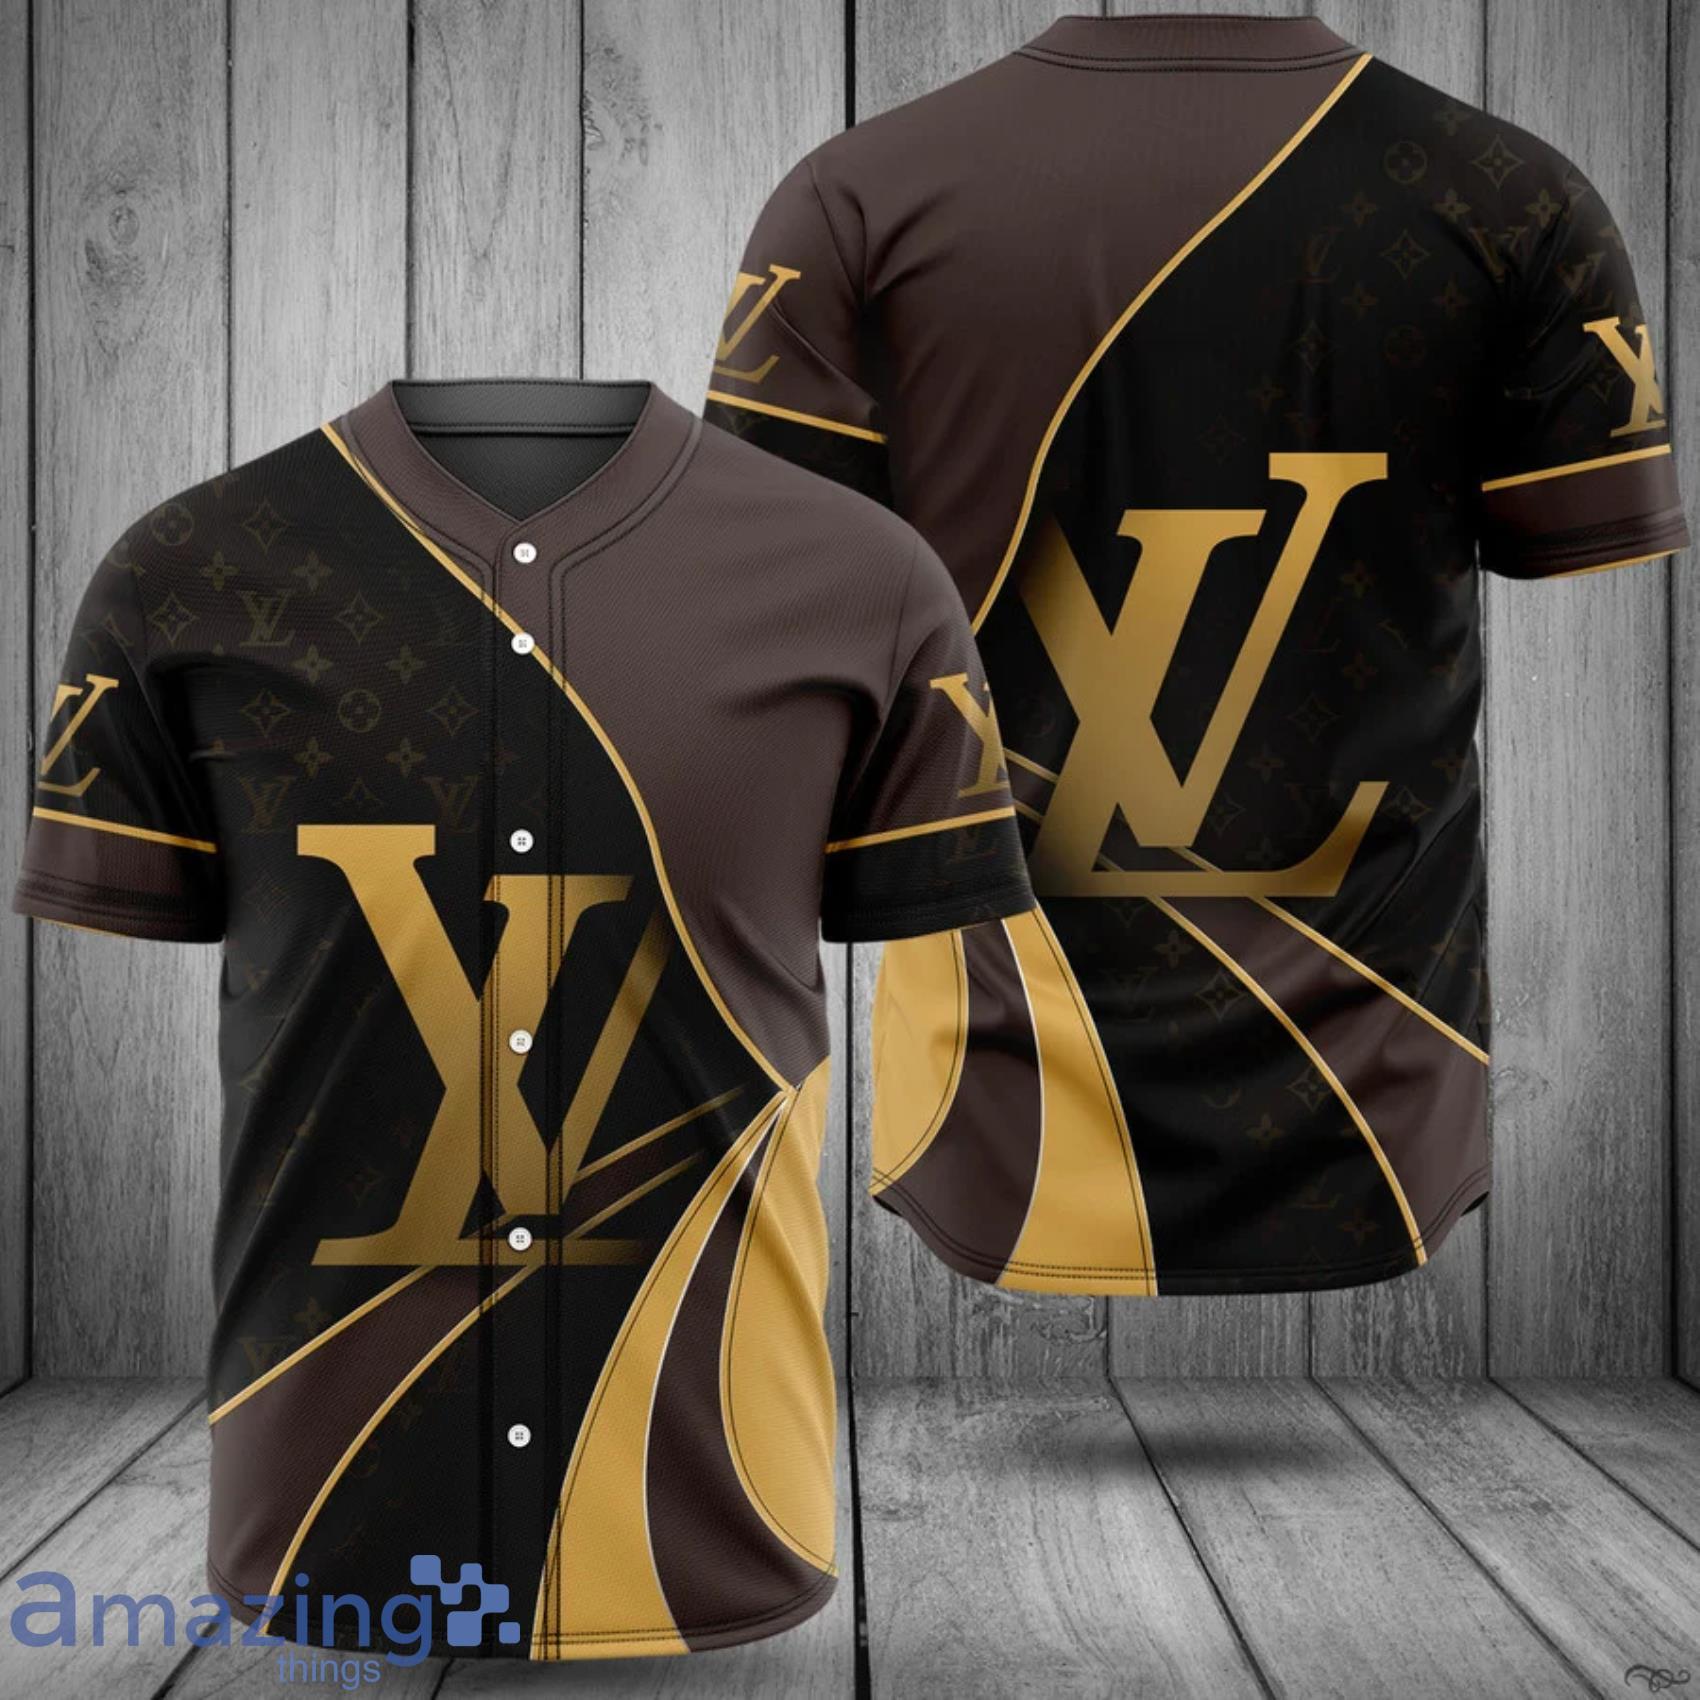 Louis Vuitton Baseball Jersey Clothes Sport Outfit For Men Women Style 1